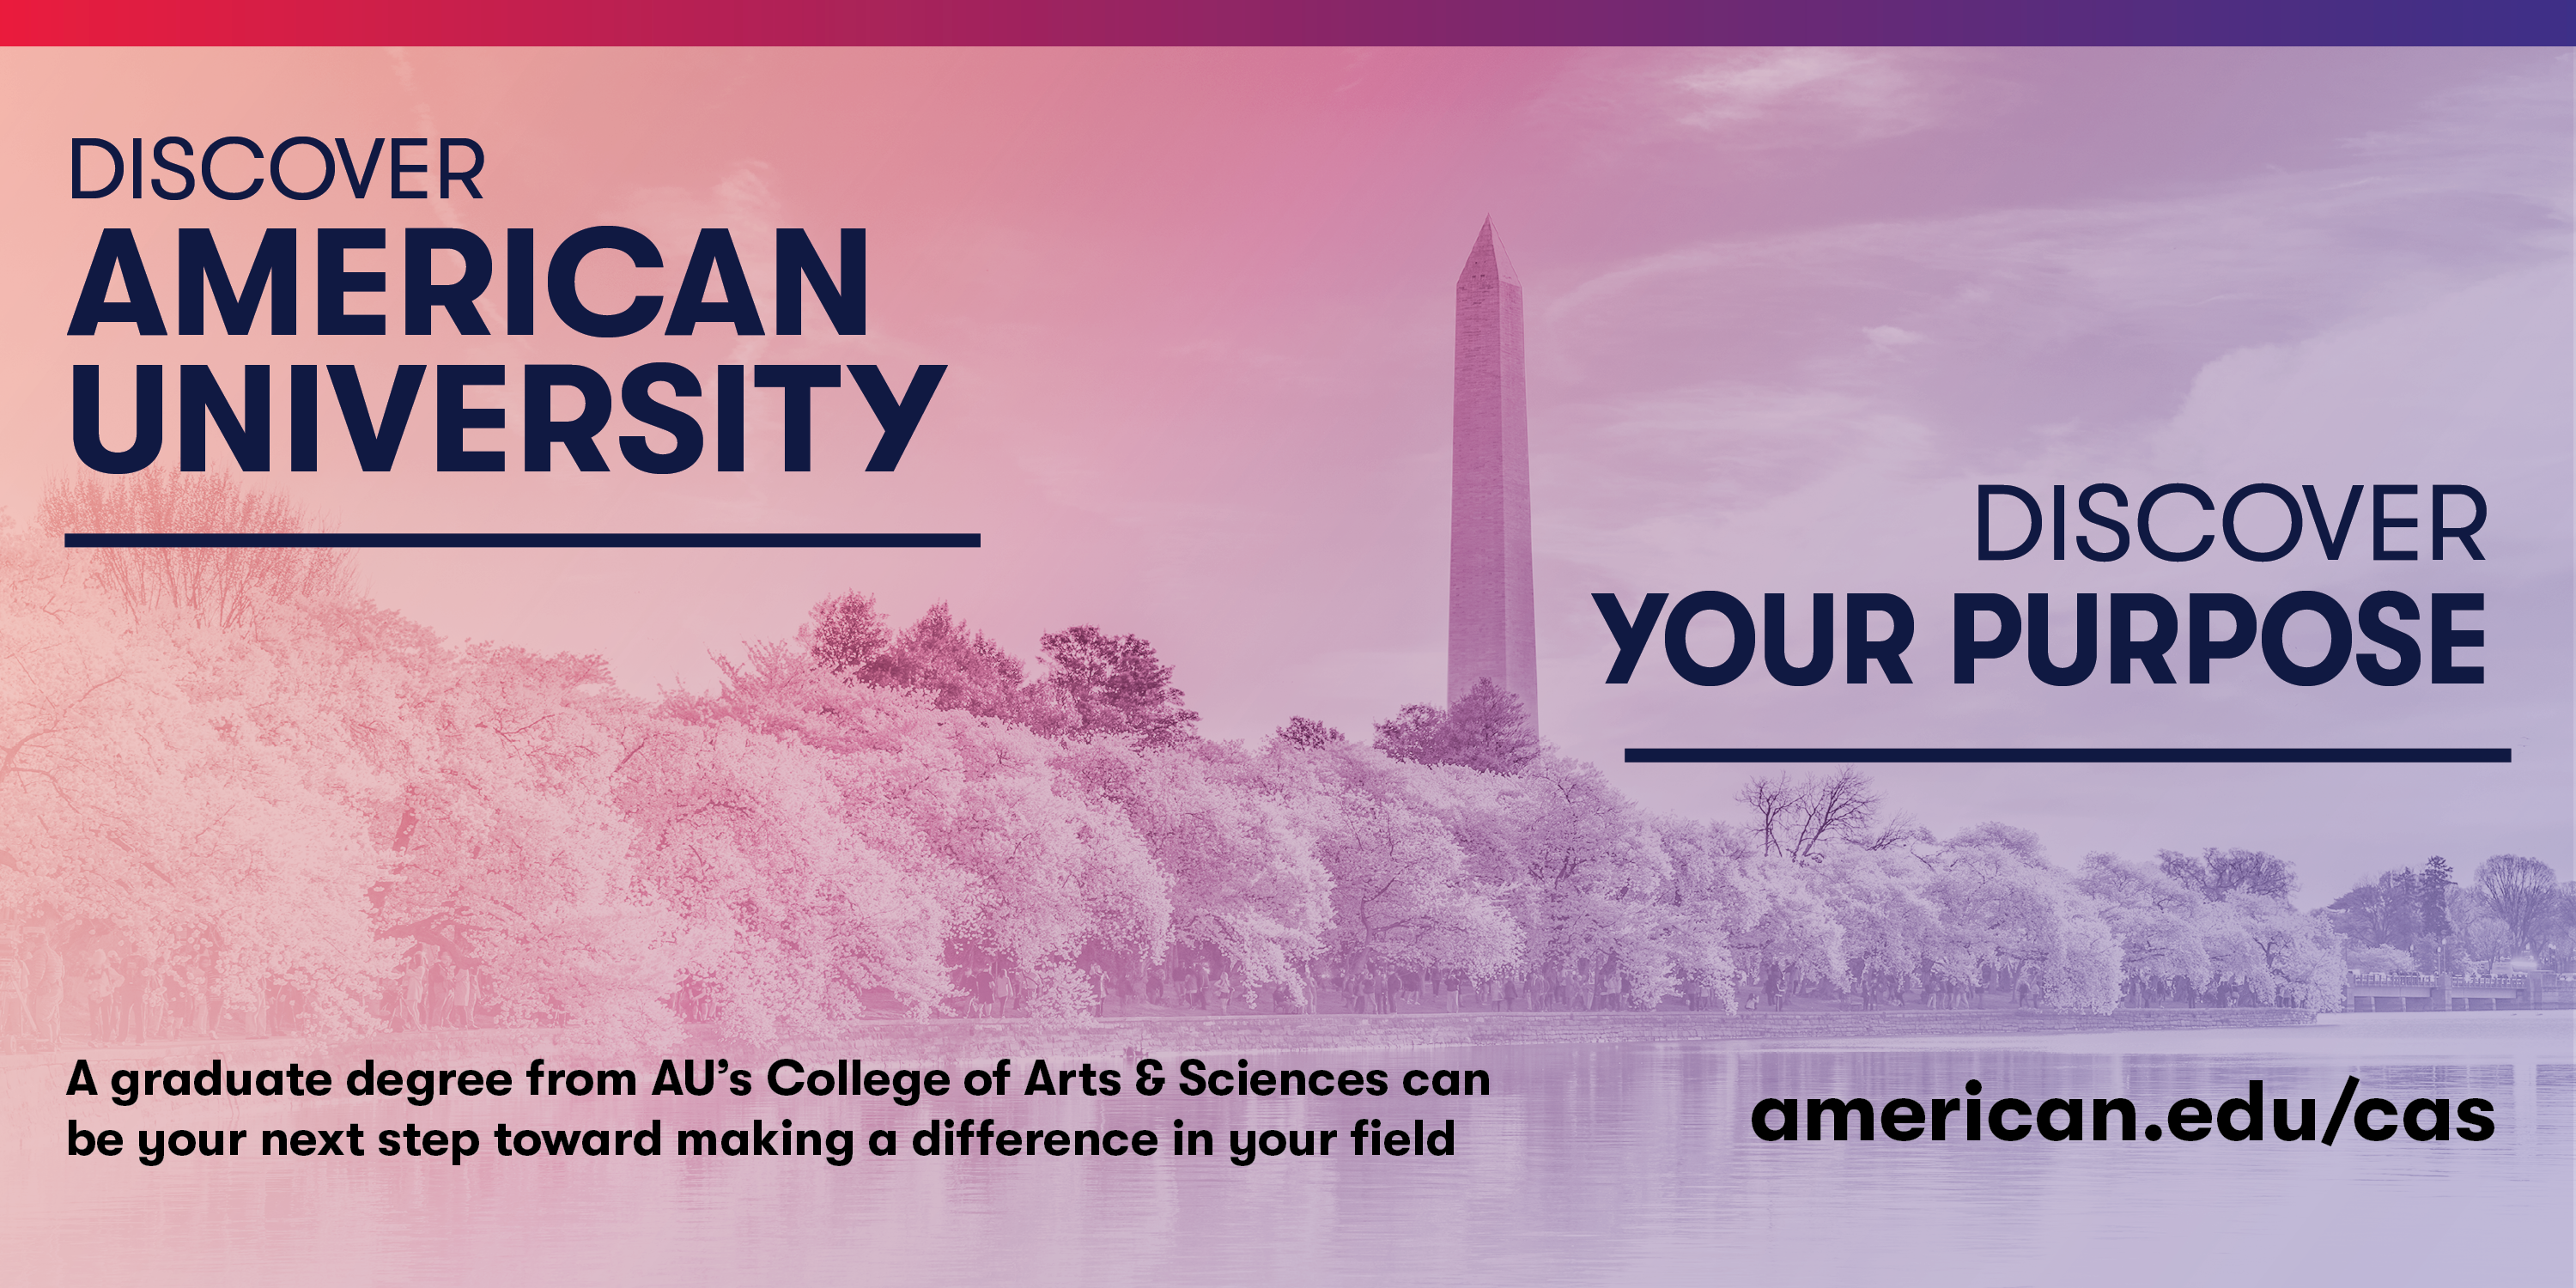 Discover American University. Discover your purpose.